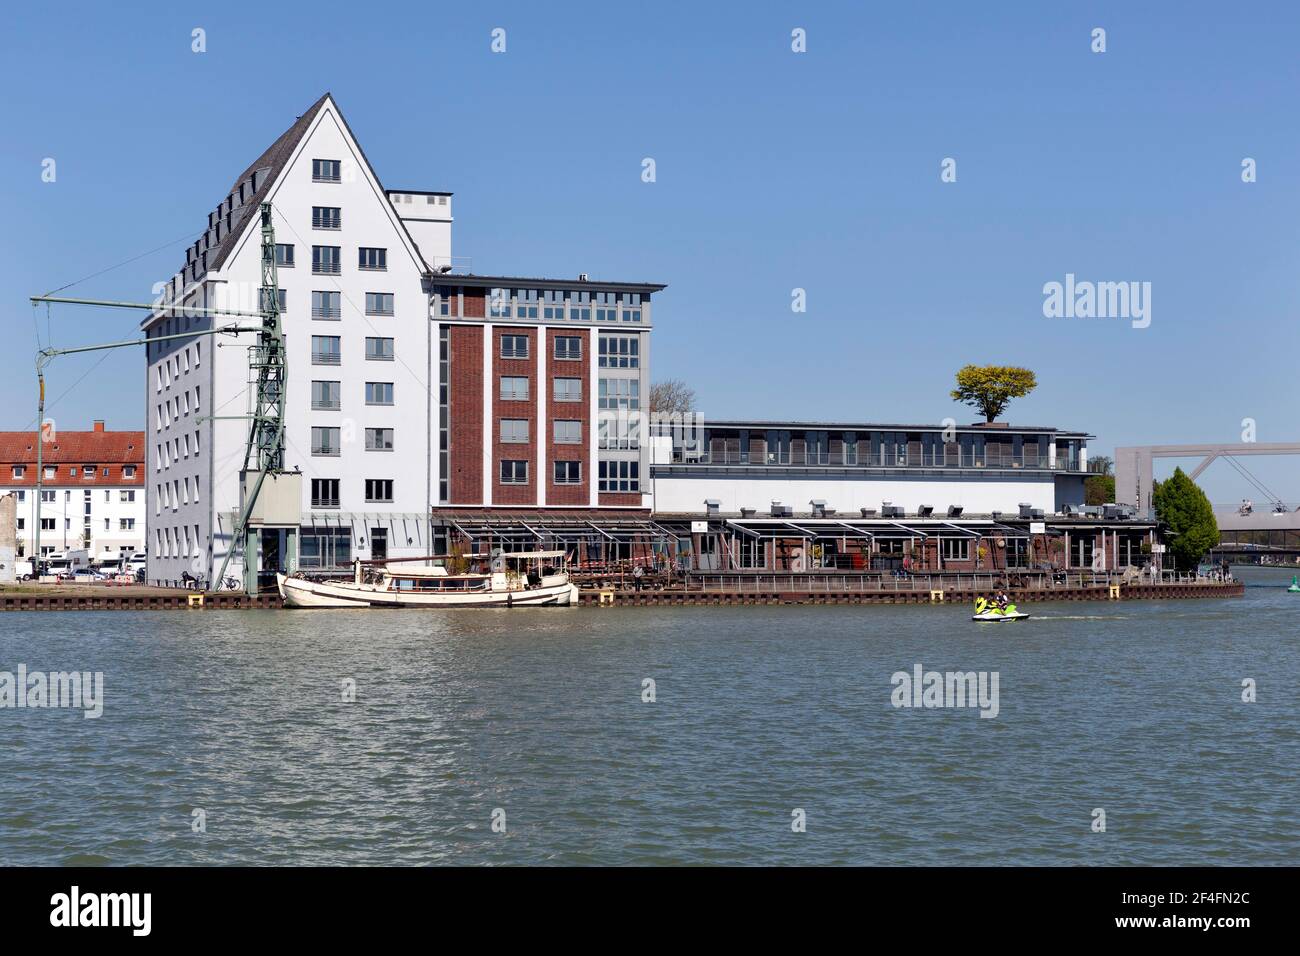 Kreativkai in the city harbour I, service, culture and gastronomy location, Muenster, Westphalia, North Rhine-Westphalia, Germany Stock Photo